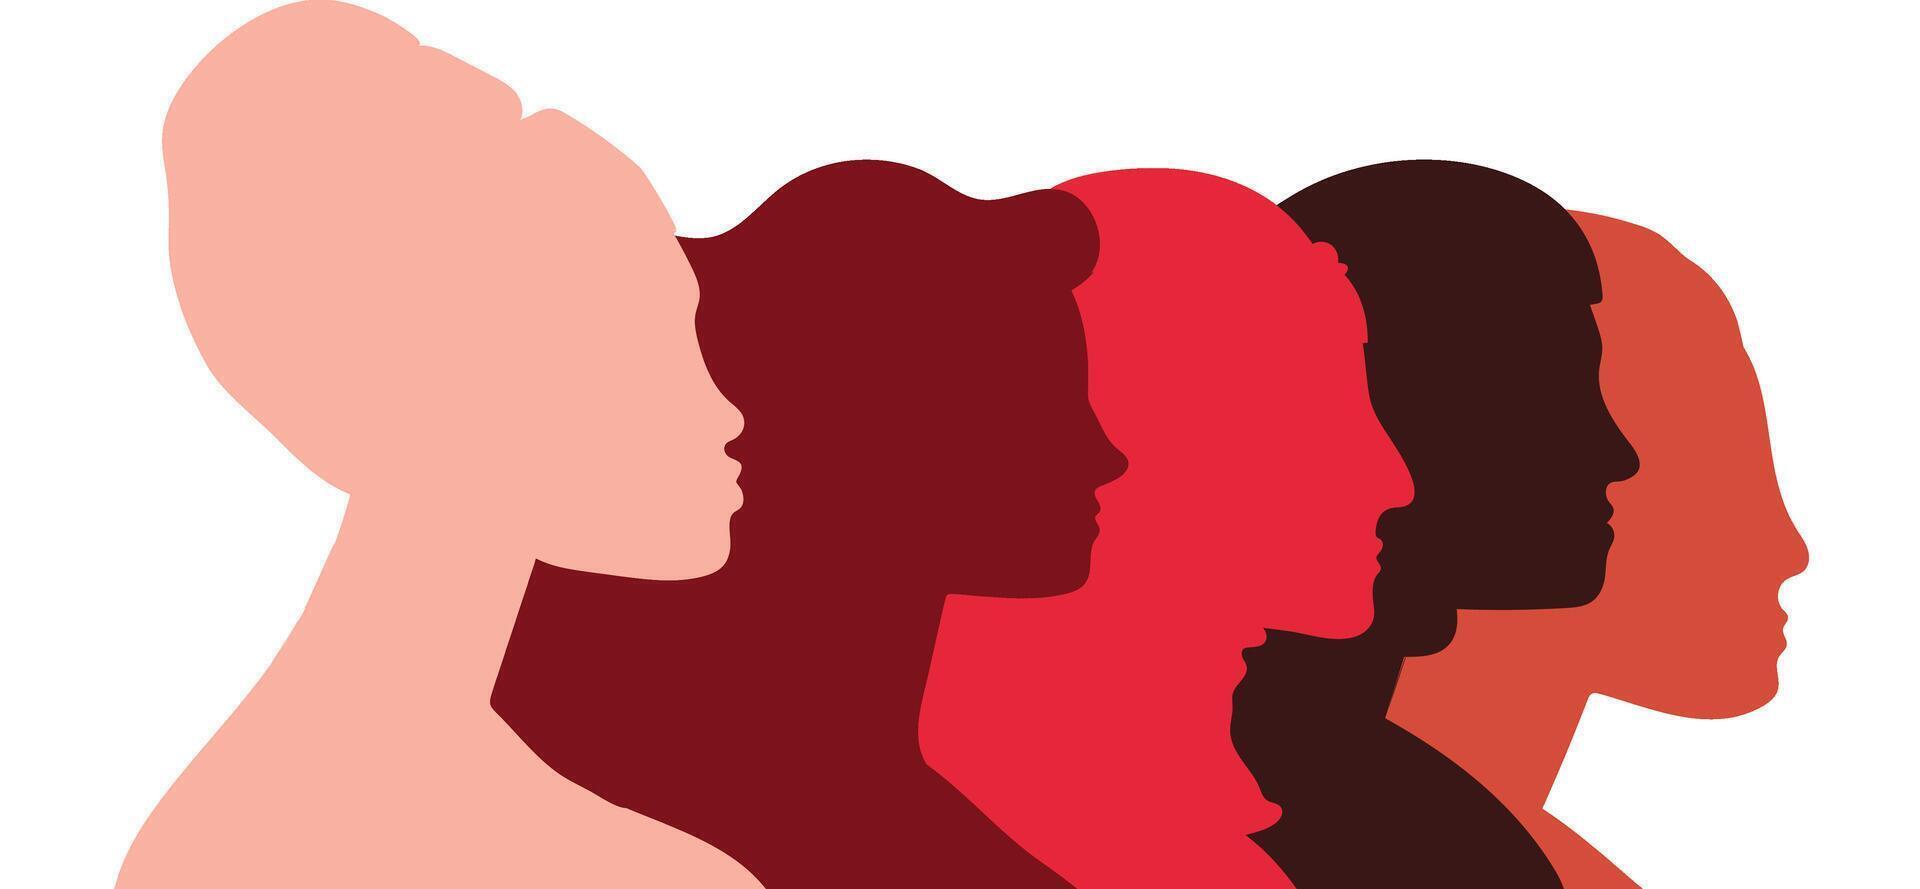 Female diverse faces of different ethnicity. Women empowerment movement pattern. vector